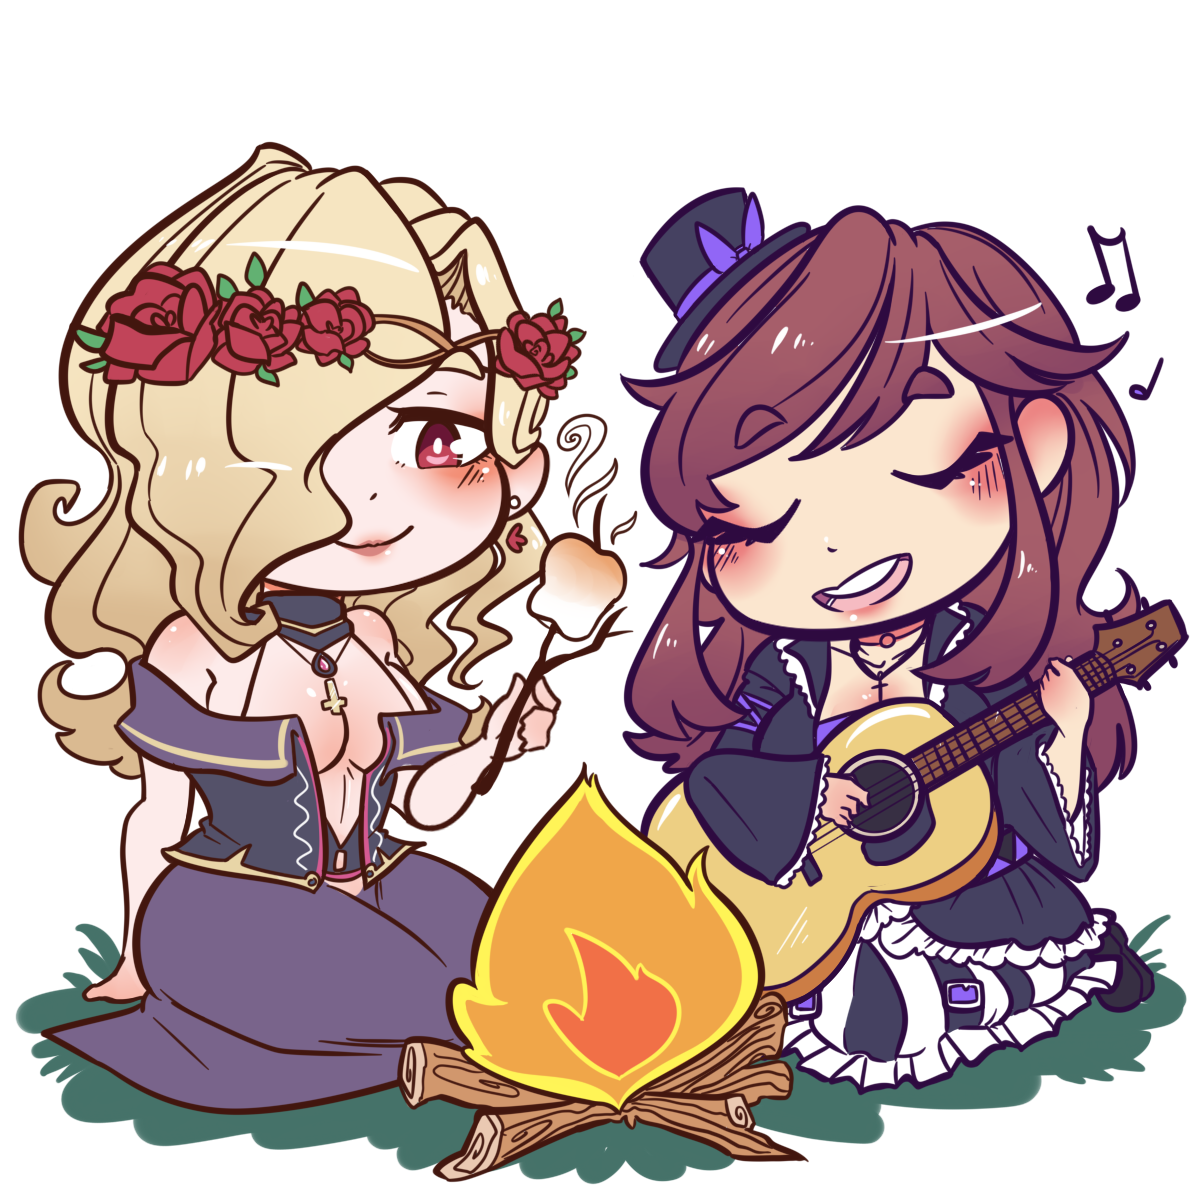 Miss Sin and Ame at a campfire